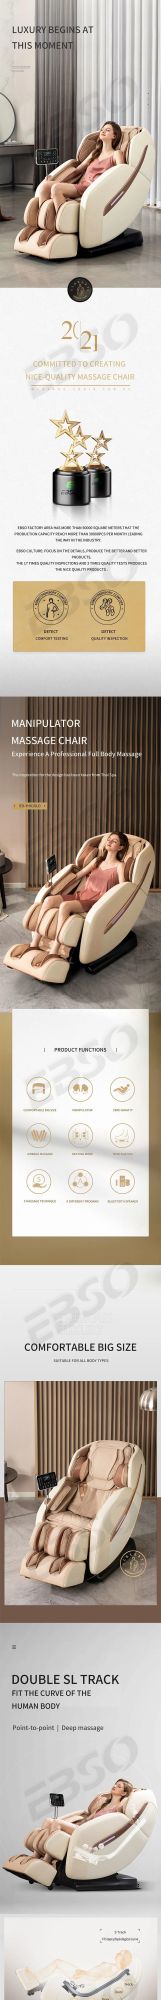 Promotional Various Durable Using Adjustable Zero Gravity Full Body Best Massage Chair